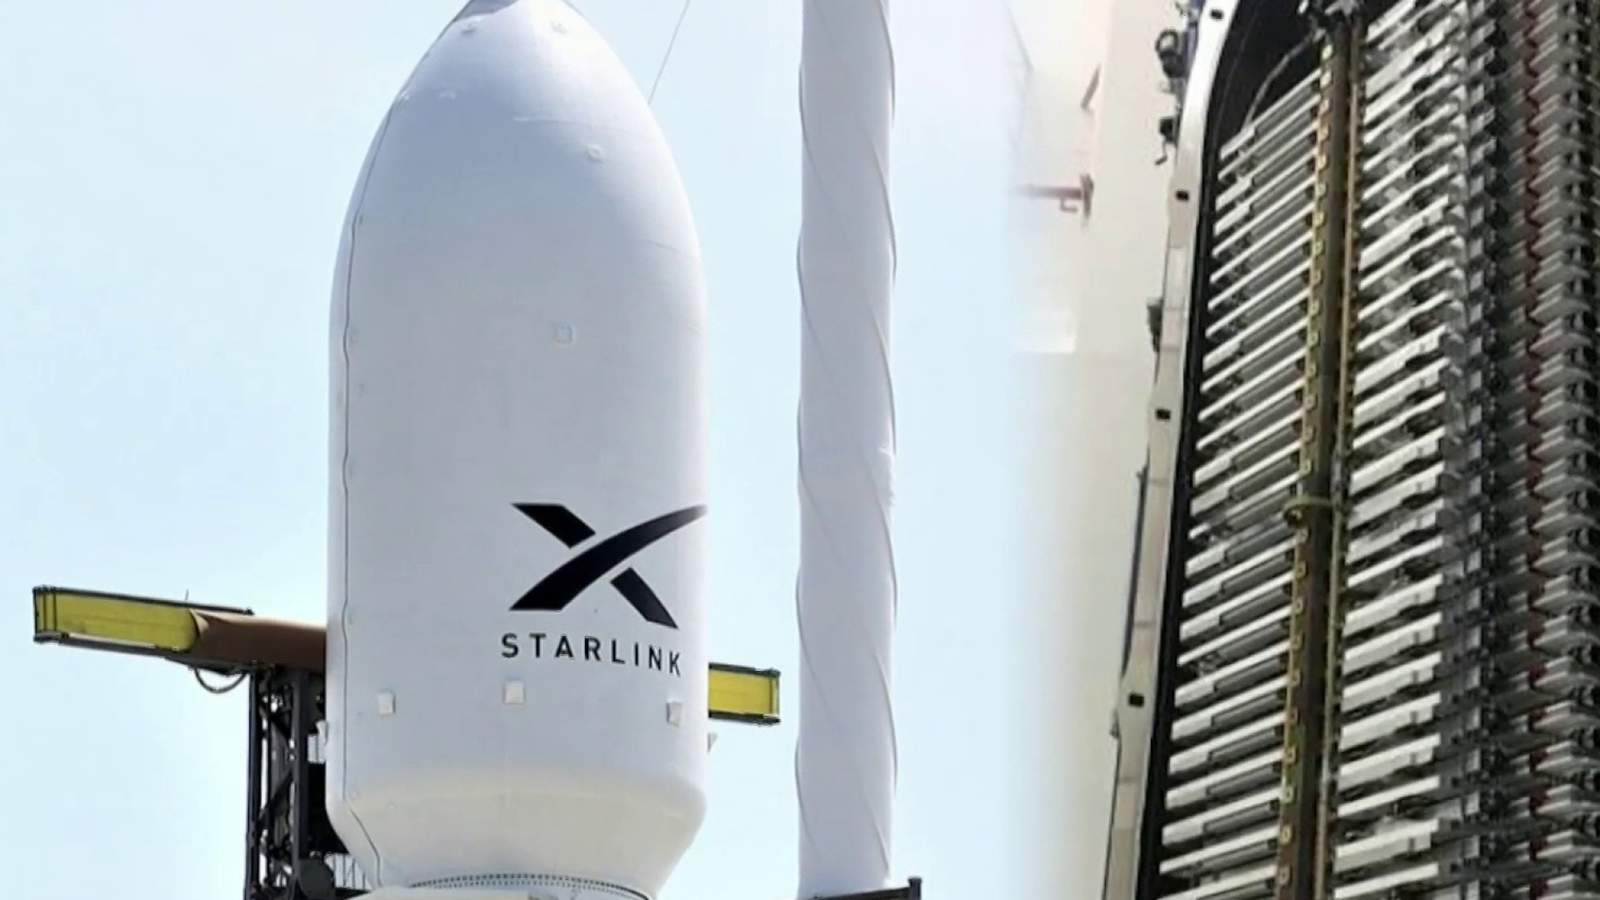 SpaceX targeting Monday morning for launch from Cape Canaveral